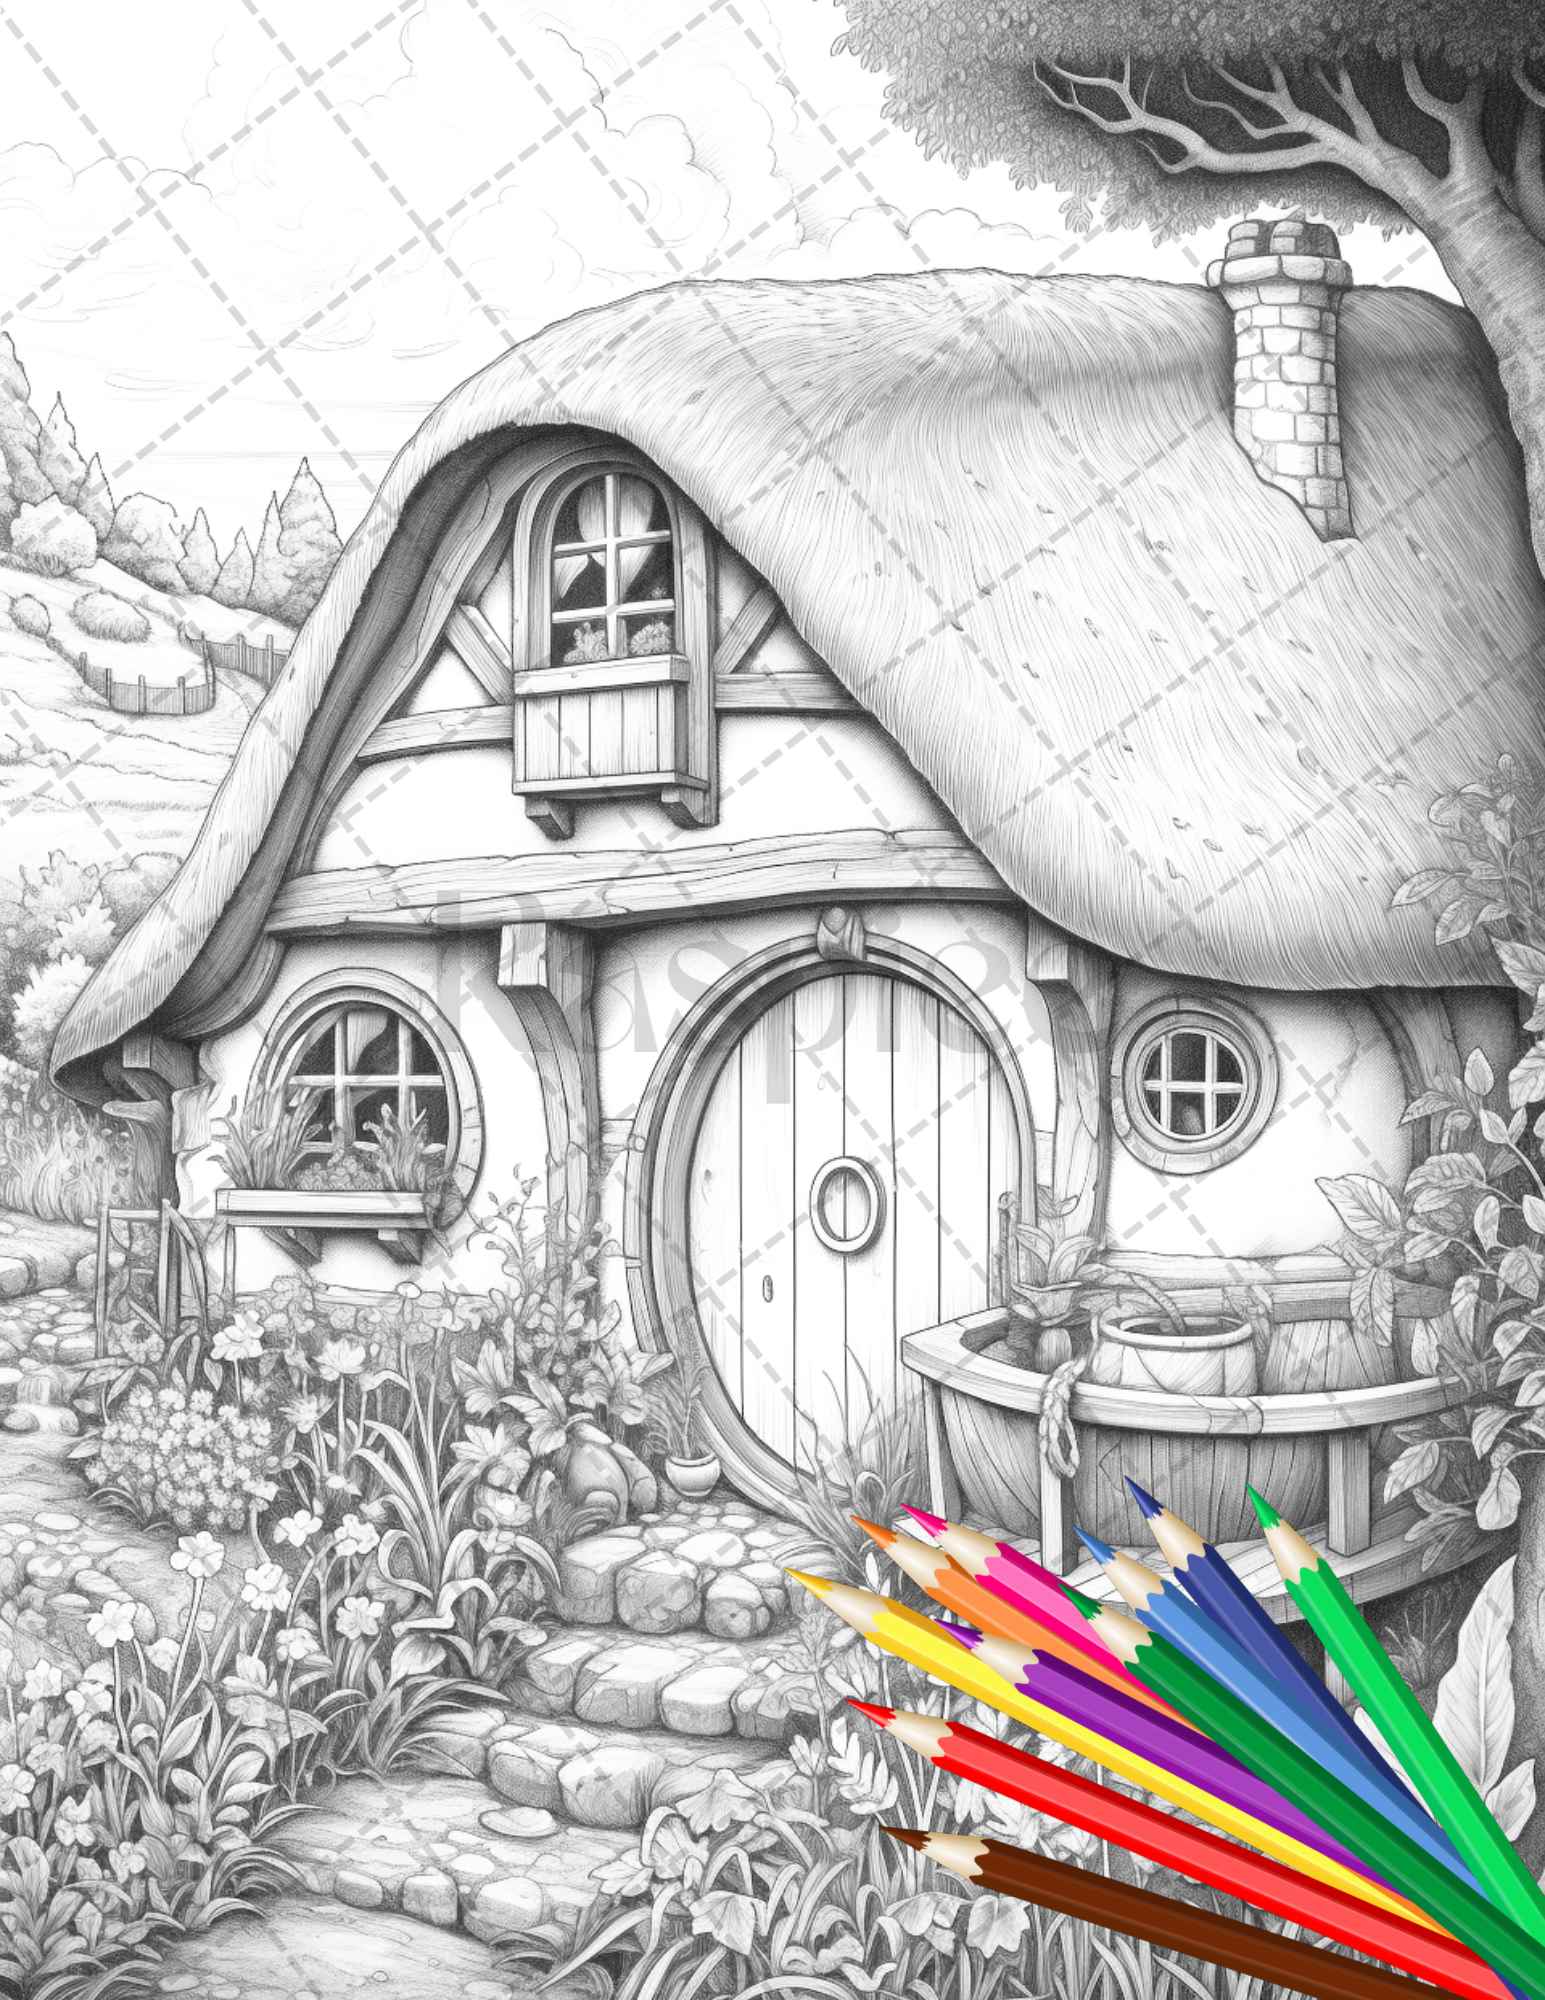 43 Cottage Gardens Coloring Book Set 2 Printable Adult Coloring Pages  Download Grayscale Illustration Printable PDF File 